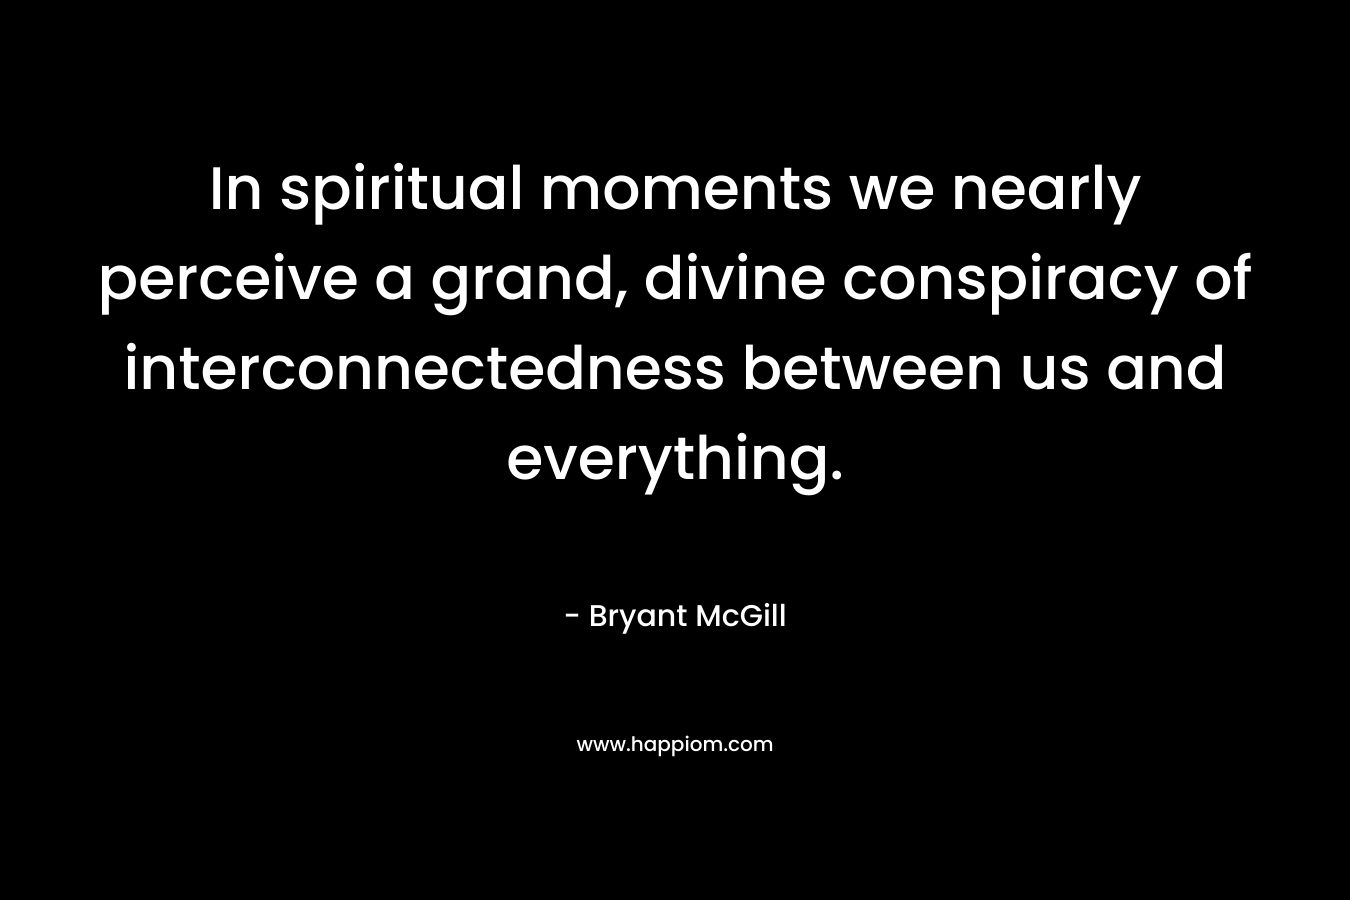 In spiritual moments we nearly perceive a grand, divine conspiracy of interconnectedness between us and everything. – Bryant McGill